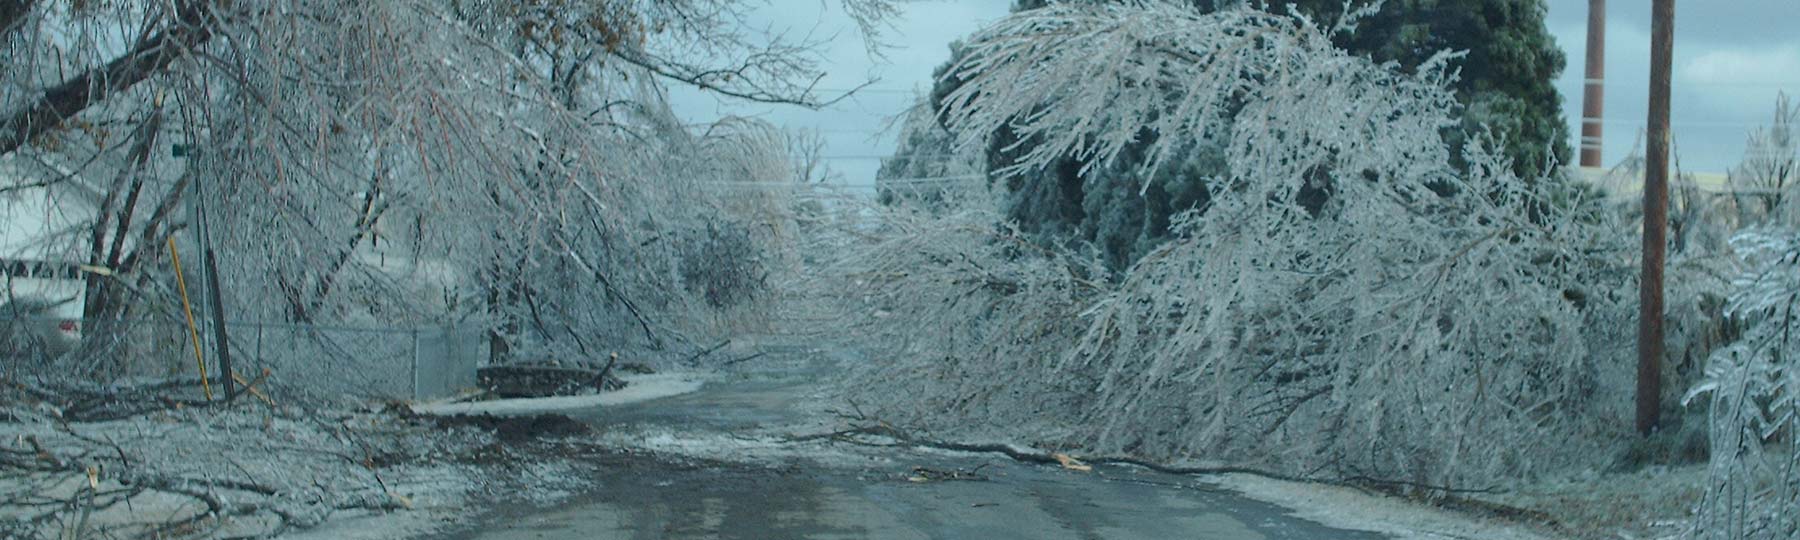 A heavy ice-covered tree branch blocking the road